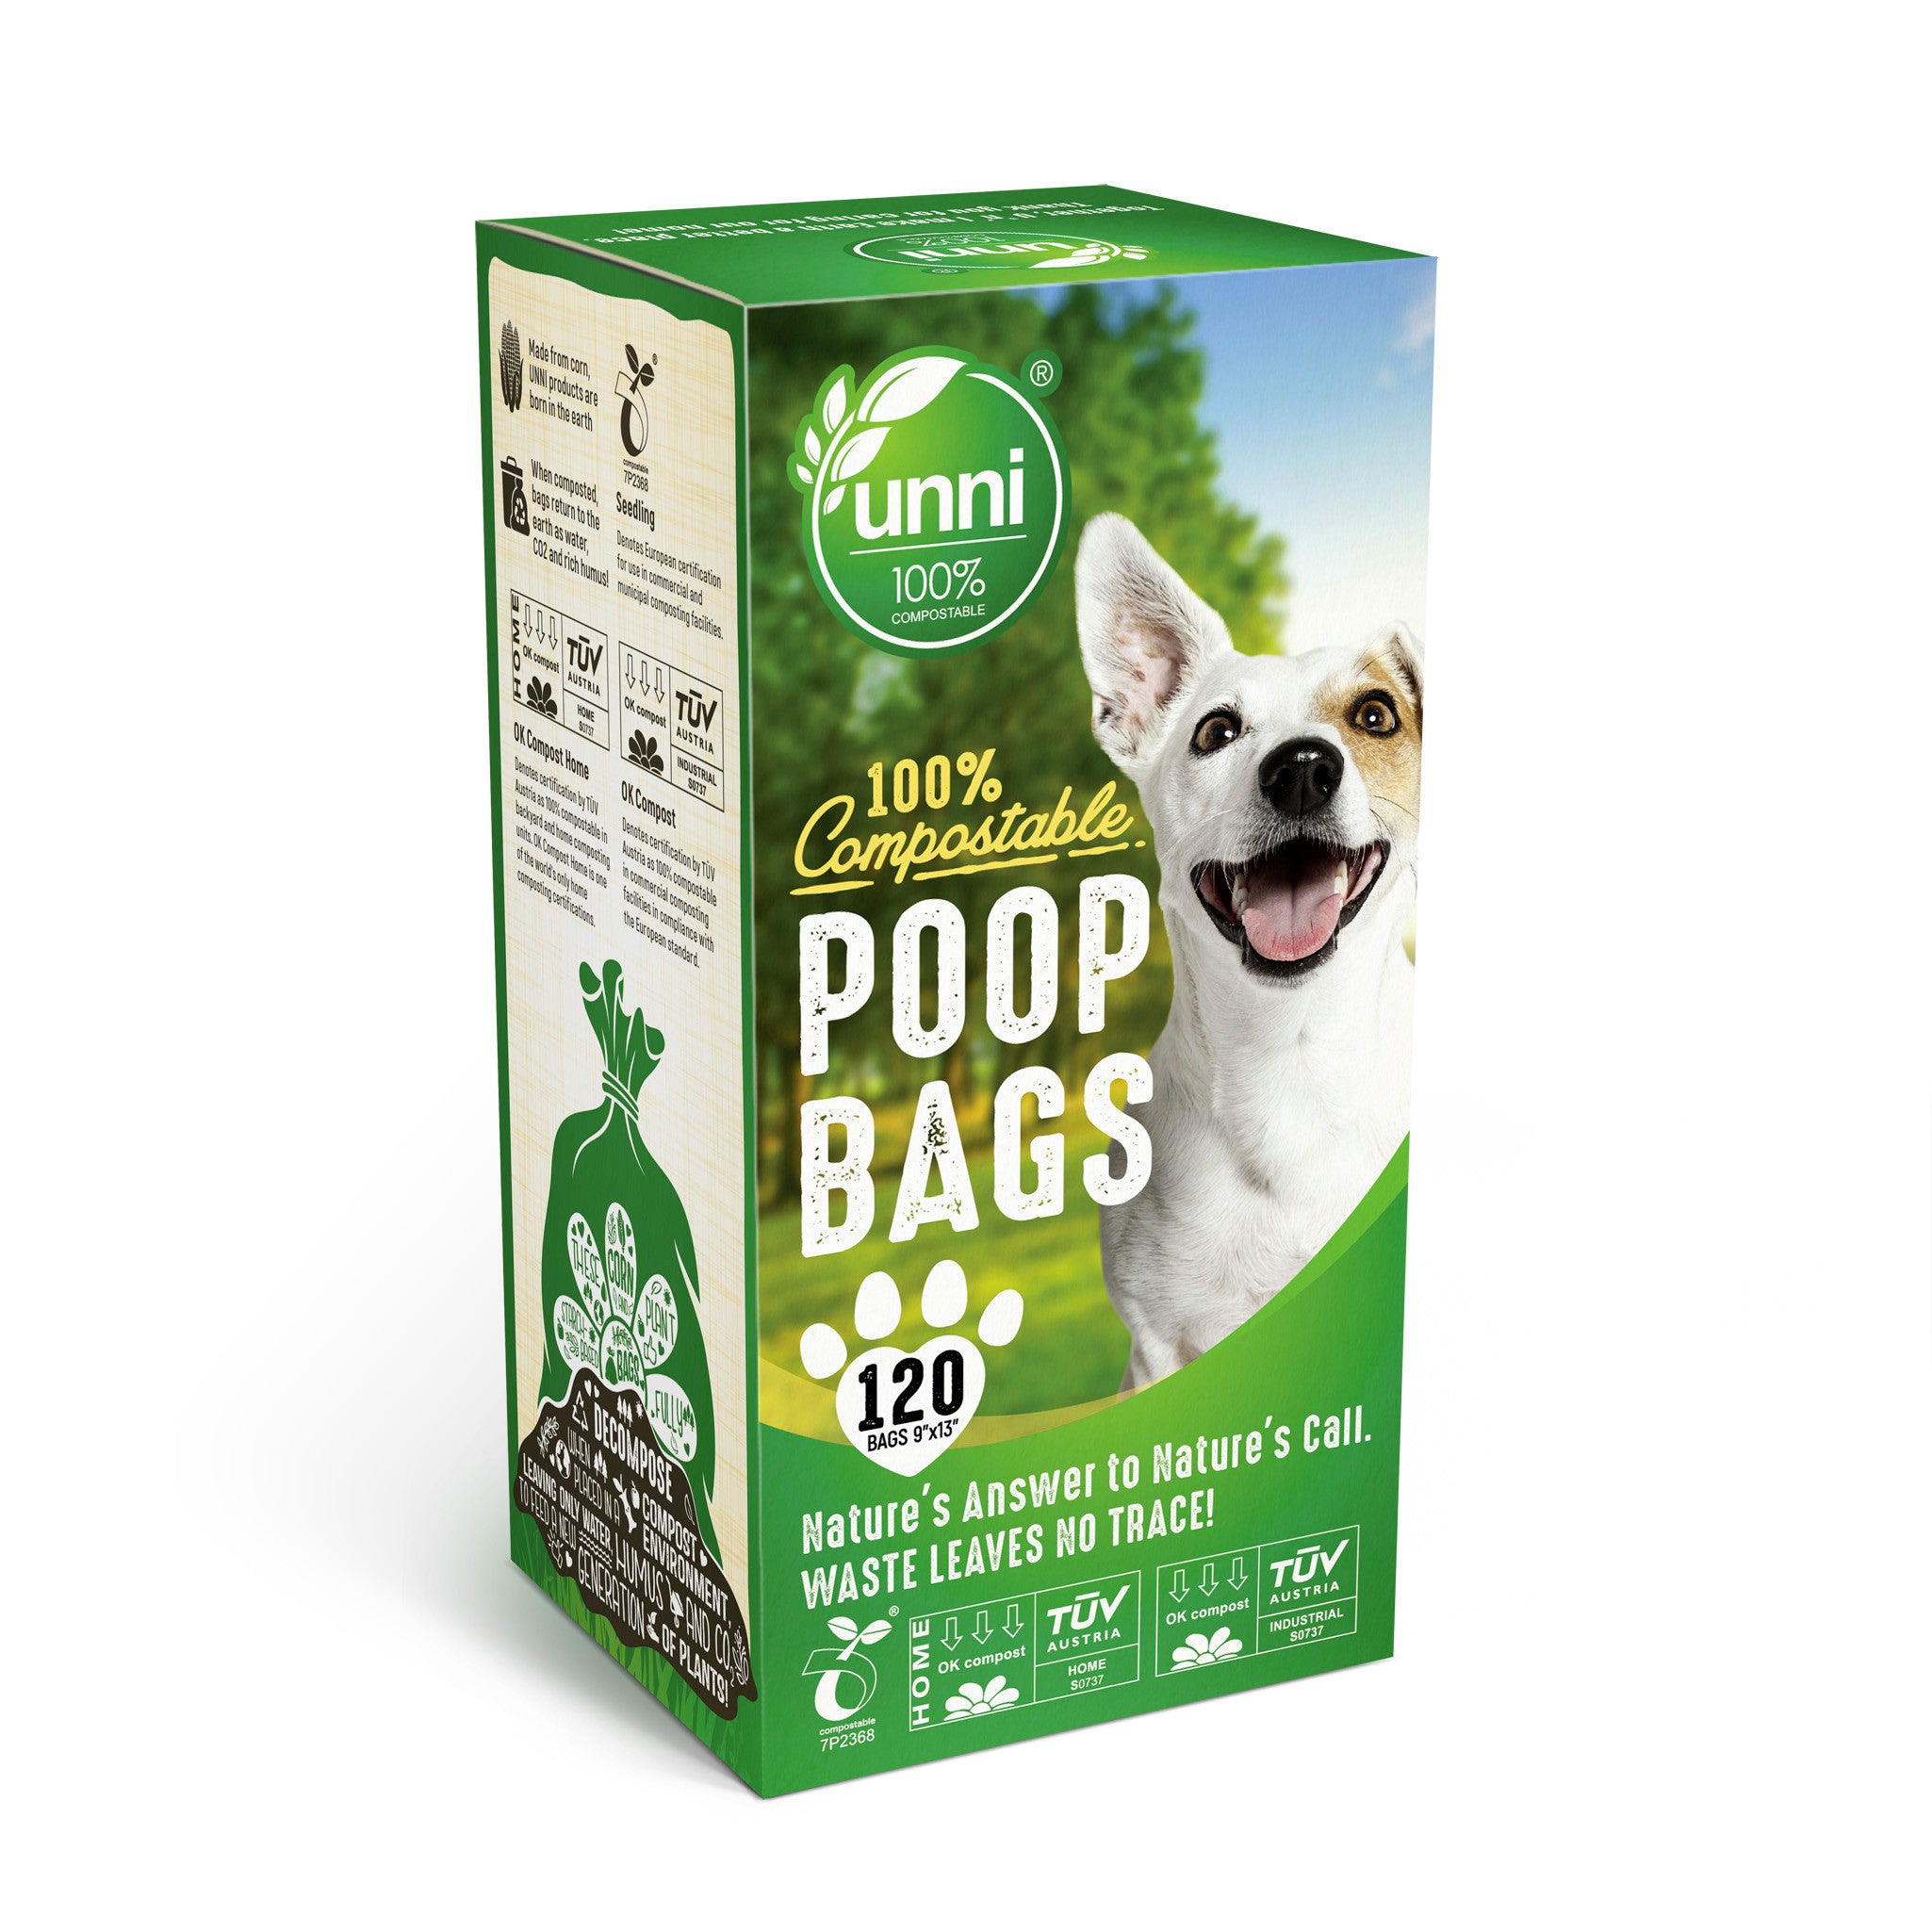 YORJA Tie Handles Dog Poo Bags, 280 Pet Poop Bags, Thick and Strong 100%  Leak-Proof Biodegradable Waste Bags : Amazon.co.uk: Pet Supplies